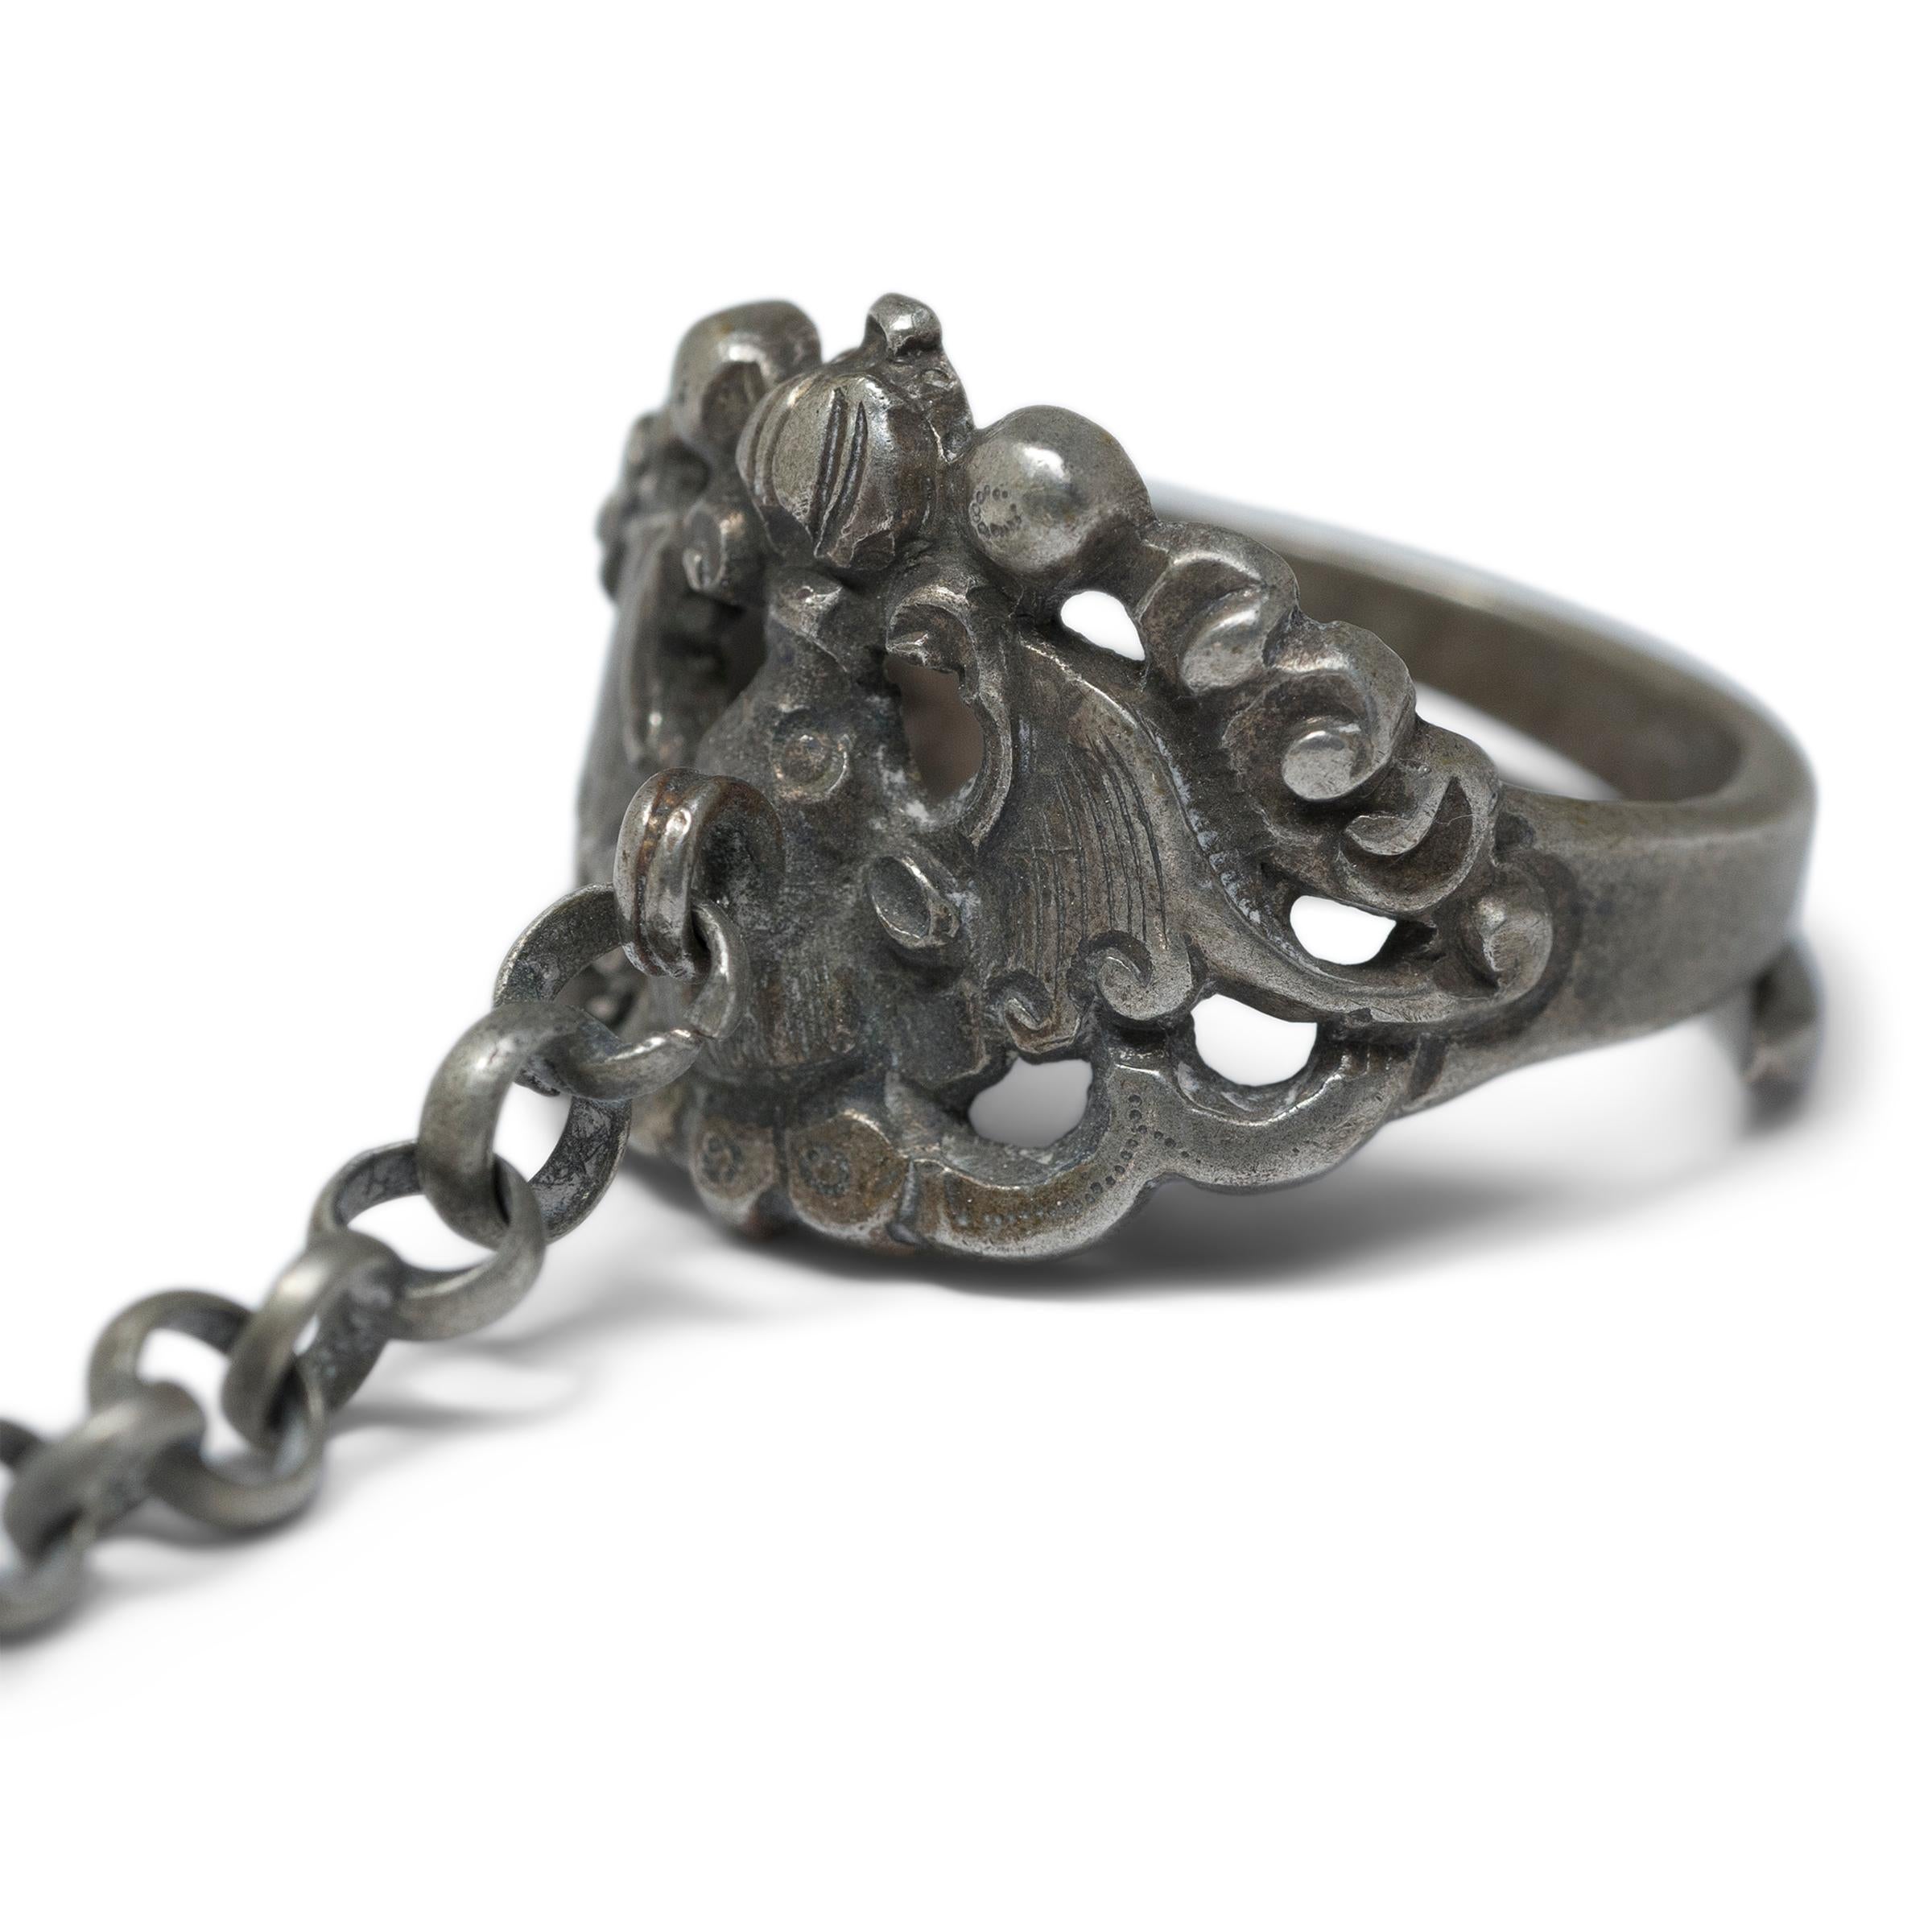 Dated to the late 19th century, this silver charm ring was believed to protect the wearer from bad luck and malevolent spirits. The ring is decorated in relief with a large bat surrounded by swirling clouds. A visual metaphor for the word